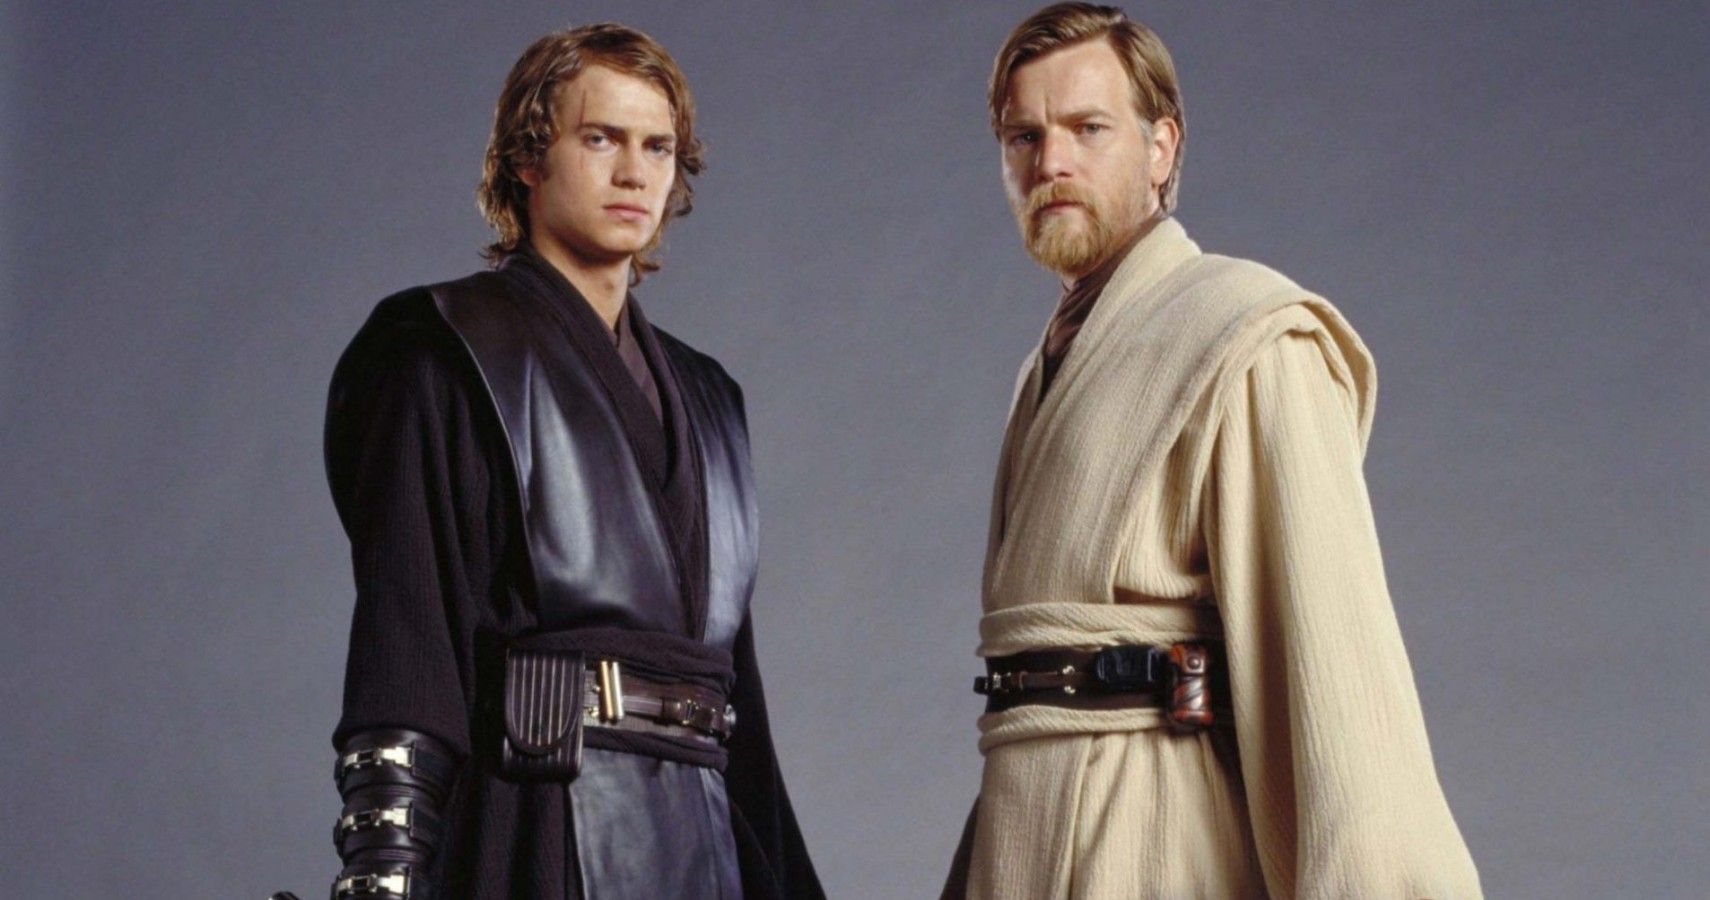 Obi Wan Vs Anakin Whos The Actual Protagonist Of The Star Wars